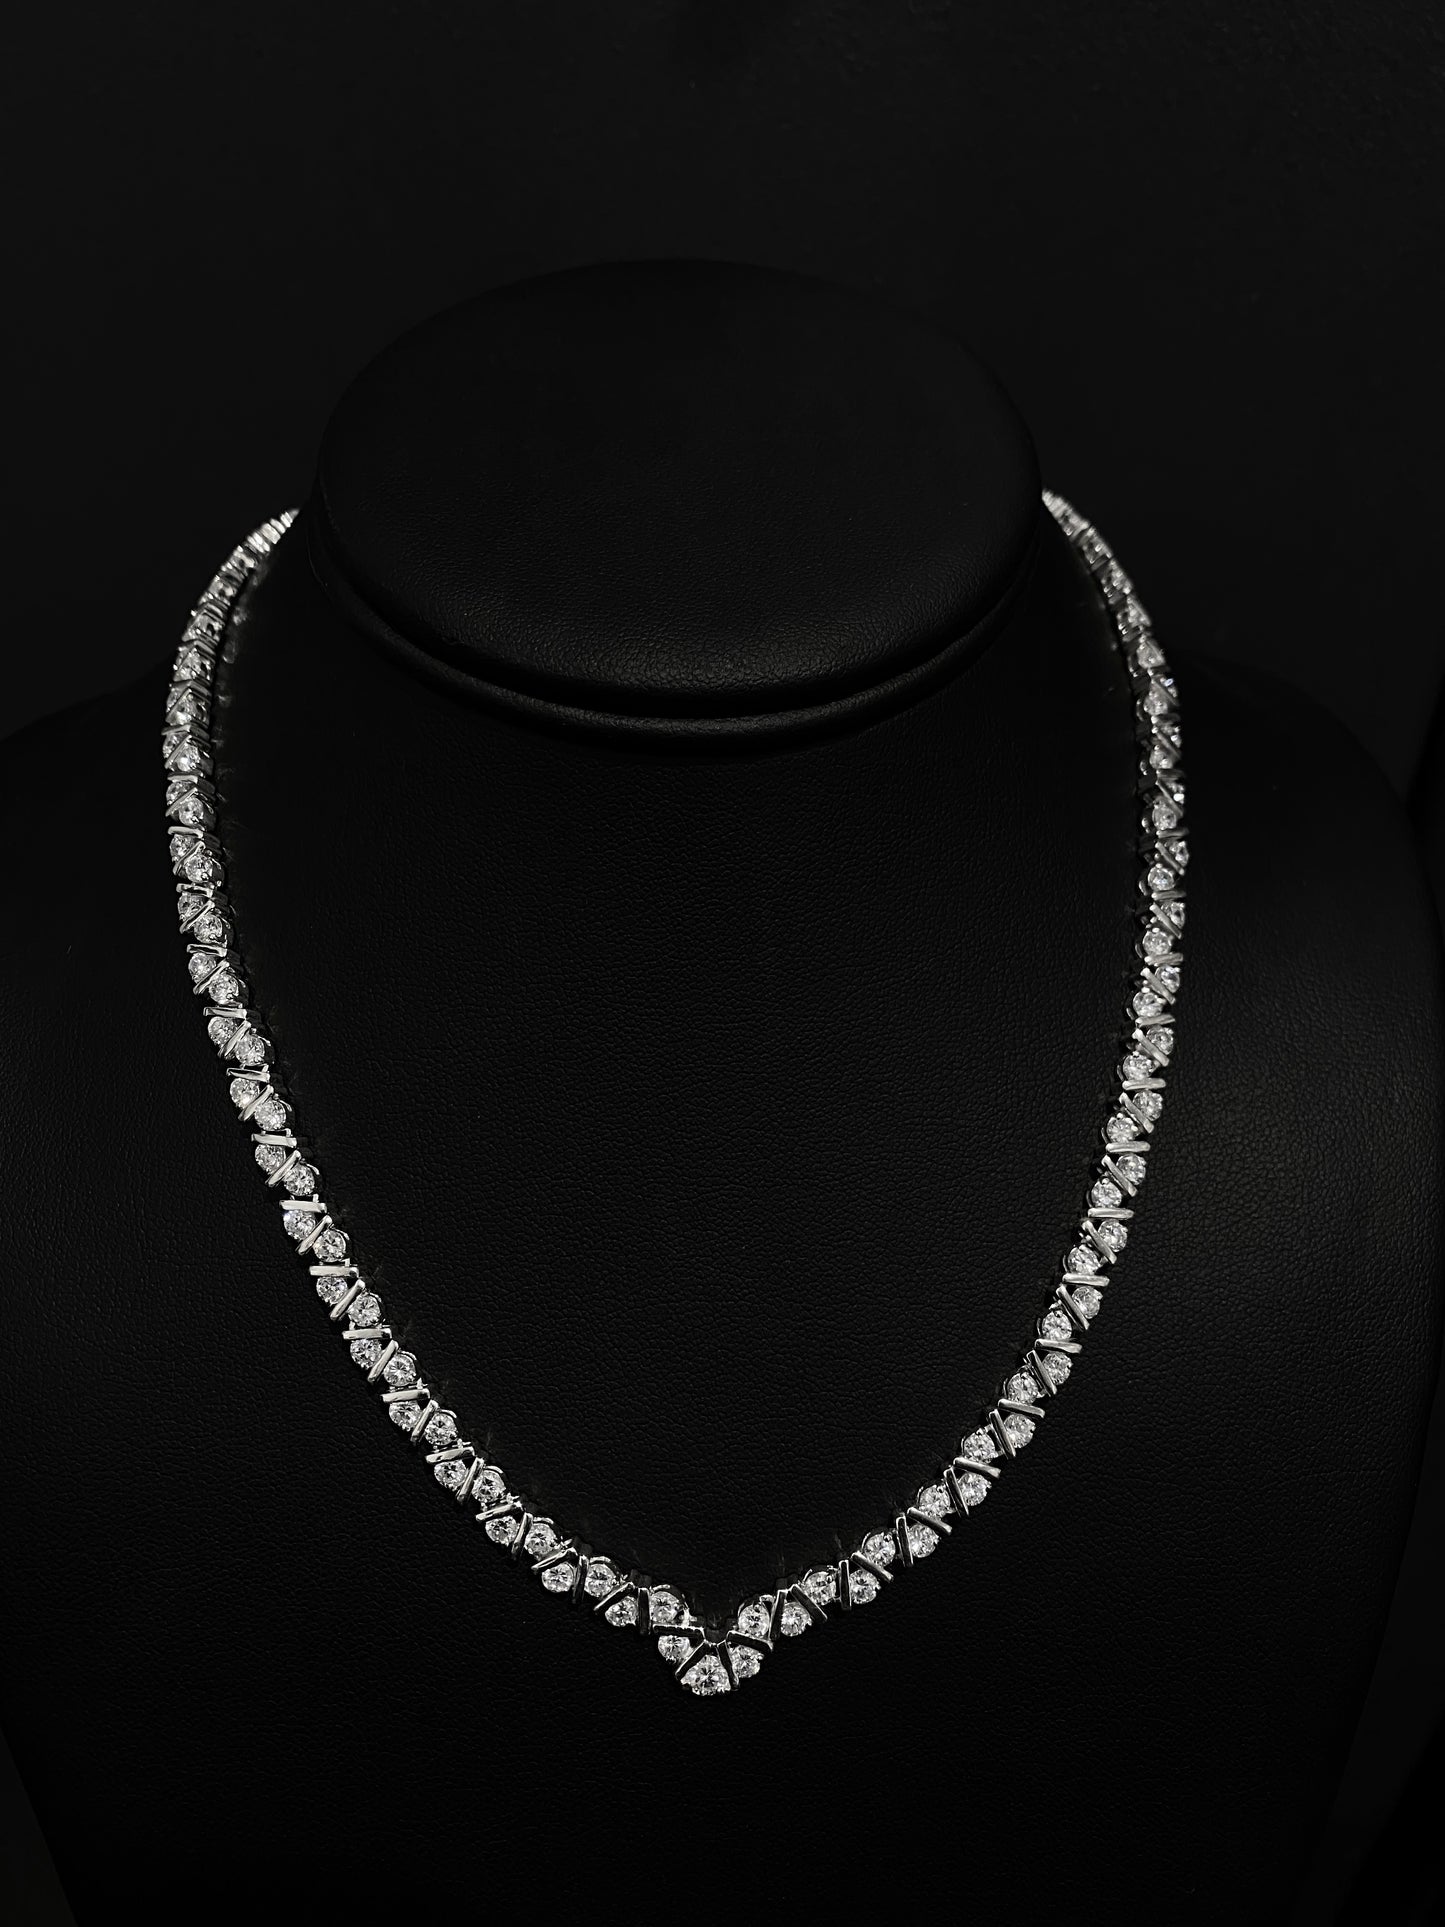 V Tennis Chain in Sterling Silver 5mm with 3mm CZs, 17"